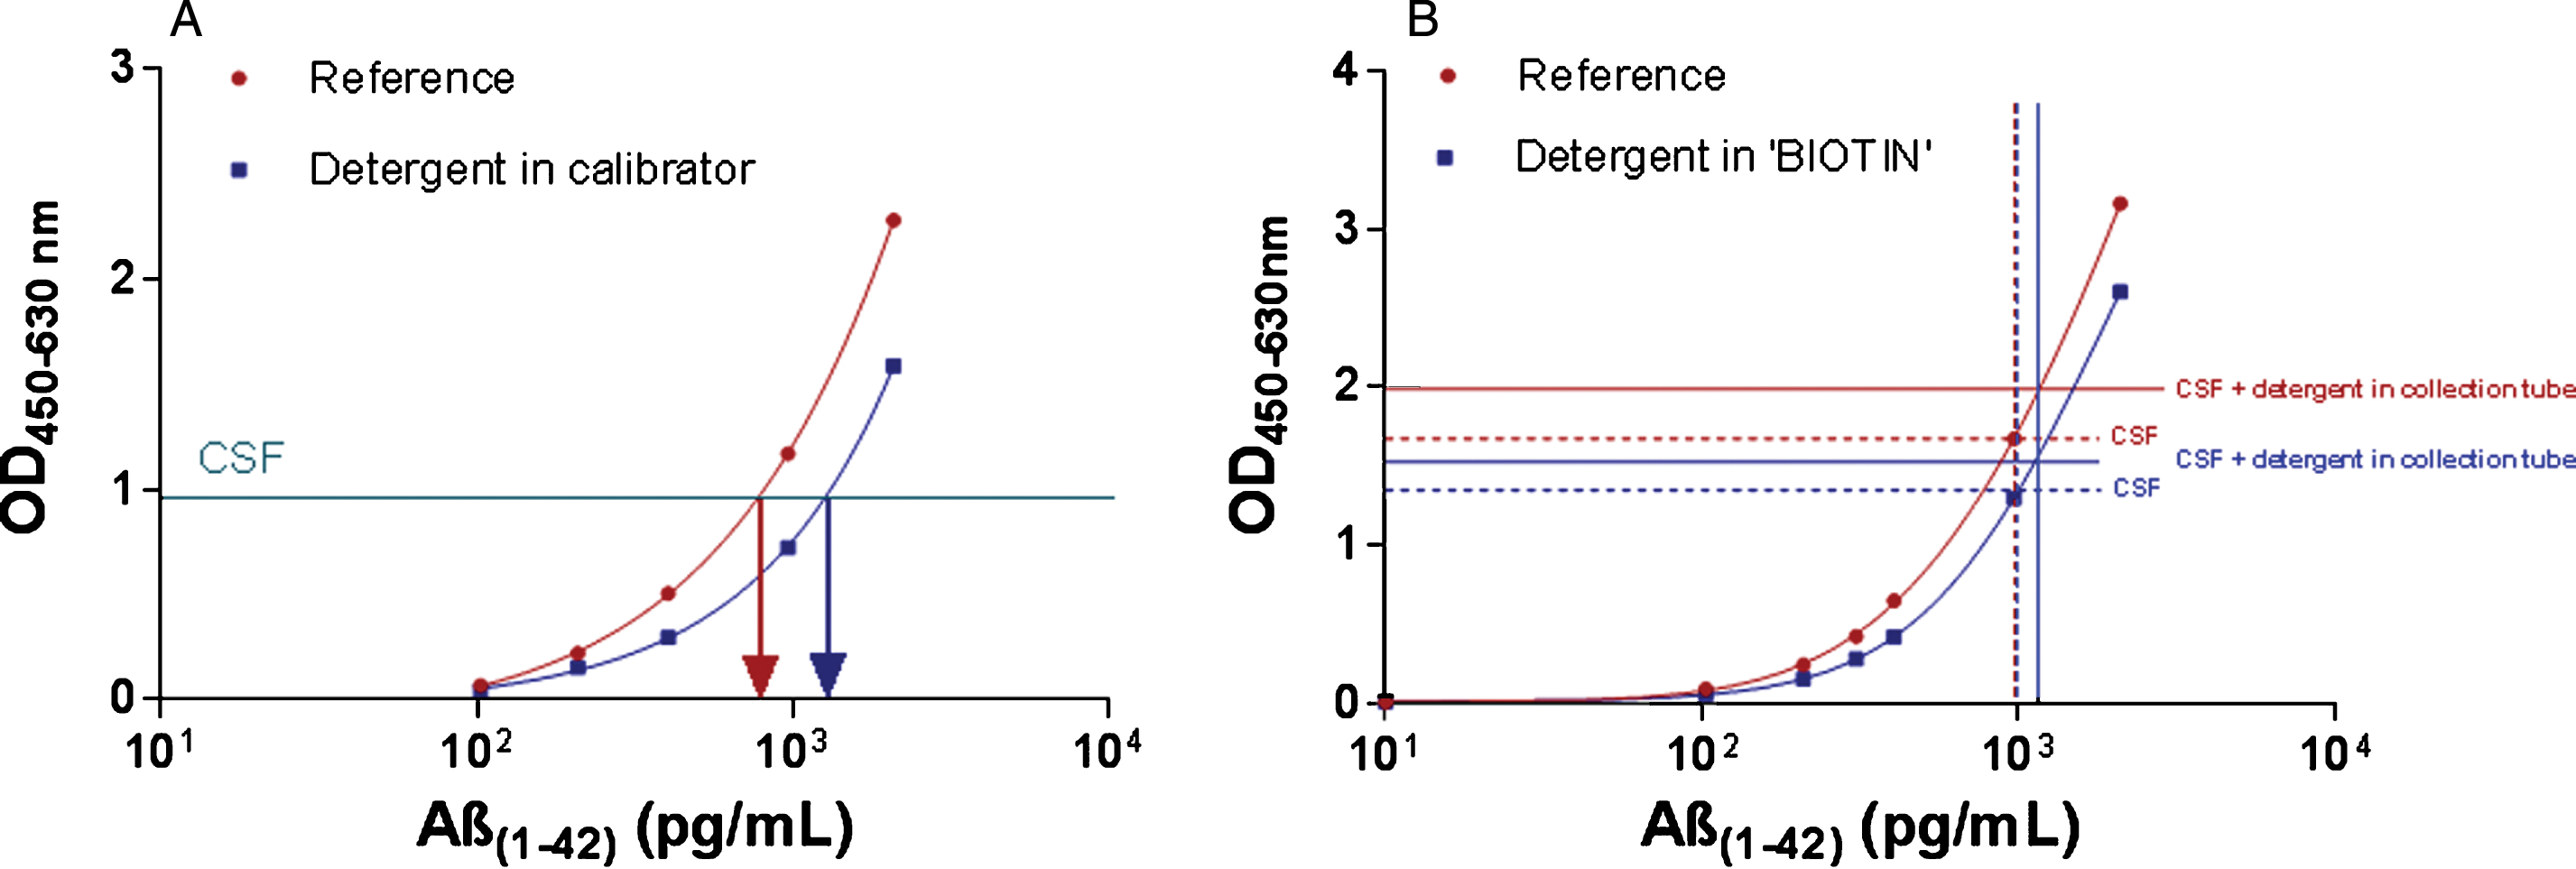 A) Effect of 0.05% detergent on the Aβ1-42 calibration curve. A representative calibration curve is presented. Each point of the curve is the mean of duplicate OD values. The addition of detergent (Tw20 or TrX100) to calibrators only reduced OD values, which can result in higher calculated analyte concentrations in CSF as compared to the use of calibrators without extra addition of a detergent (Results were confirmed several times). B) Effect of addition of detergent to ‘BIOTIN’ or in CSF collection tubes on CSF Aβ1-42 concentration. Addition of detergent to the “BIOTIN” component (= biotinylated antibody, incubated simultaneously with samples or calibrators) resulted in a reduction in OD values for samples and calibrators. In addition, CSF in which detergent was added at the time of collection showed higher OD values as compared to CSF without detergent. This was due to an effect on the equilibrium between protein-bound and free analyte in the biological matrix, resulting in higher analyte concentrations. As shown by the vertical lines, no difference in concentration is obtained when an assay with detergent in “BIOTIN” is compared to an assay performed without the addition of detergent, for each type of sample.